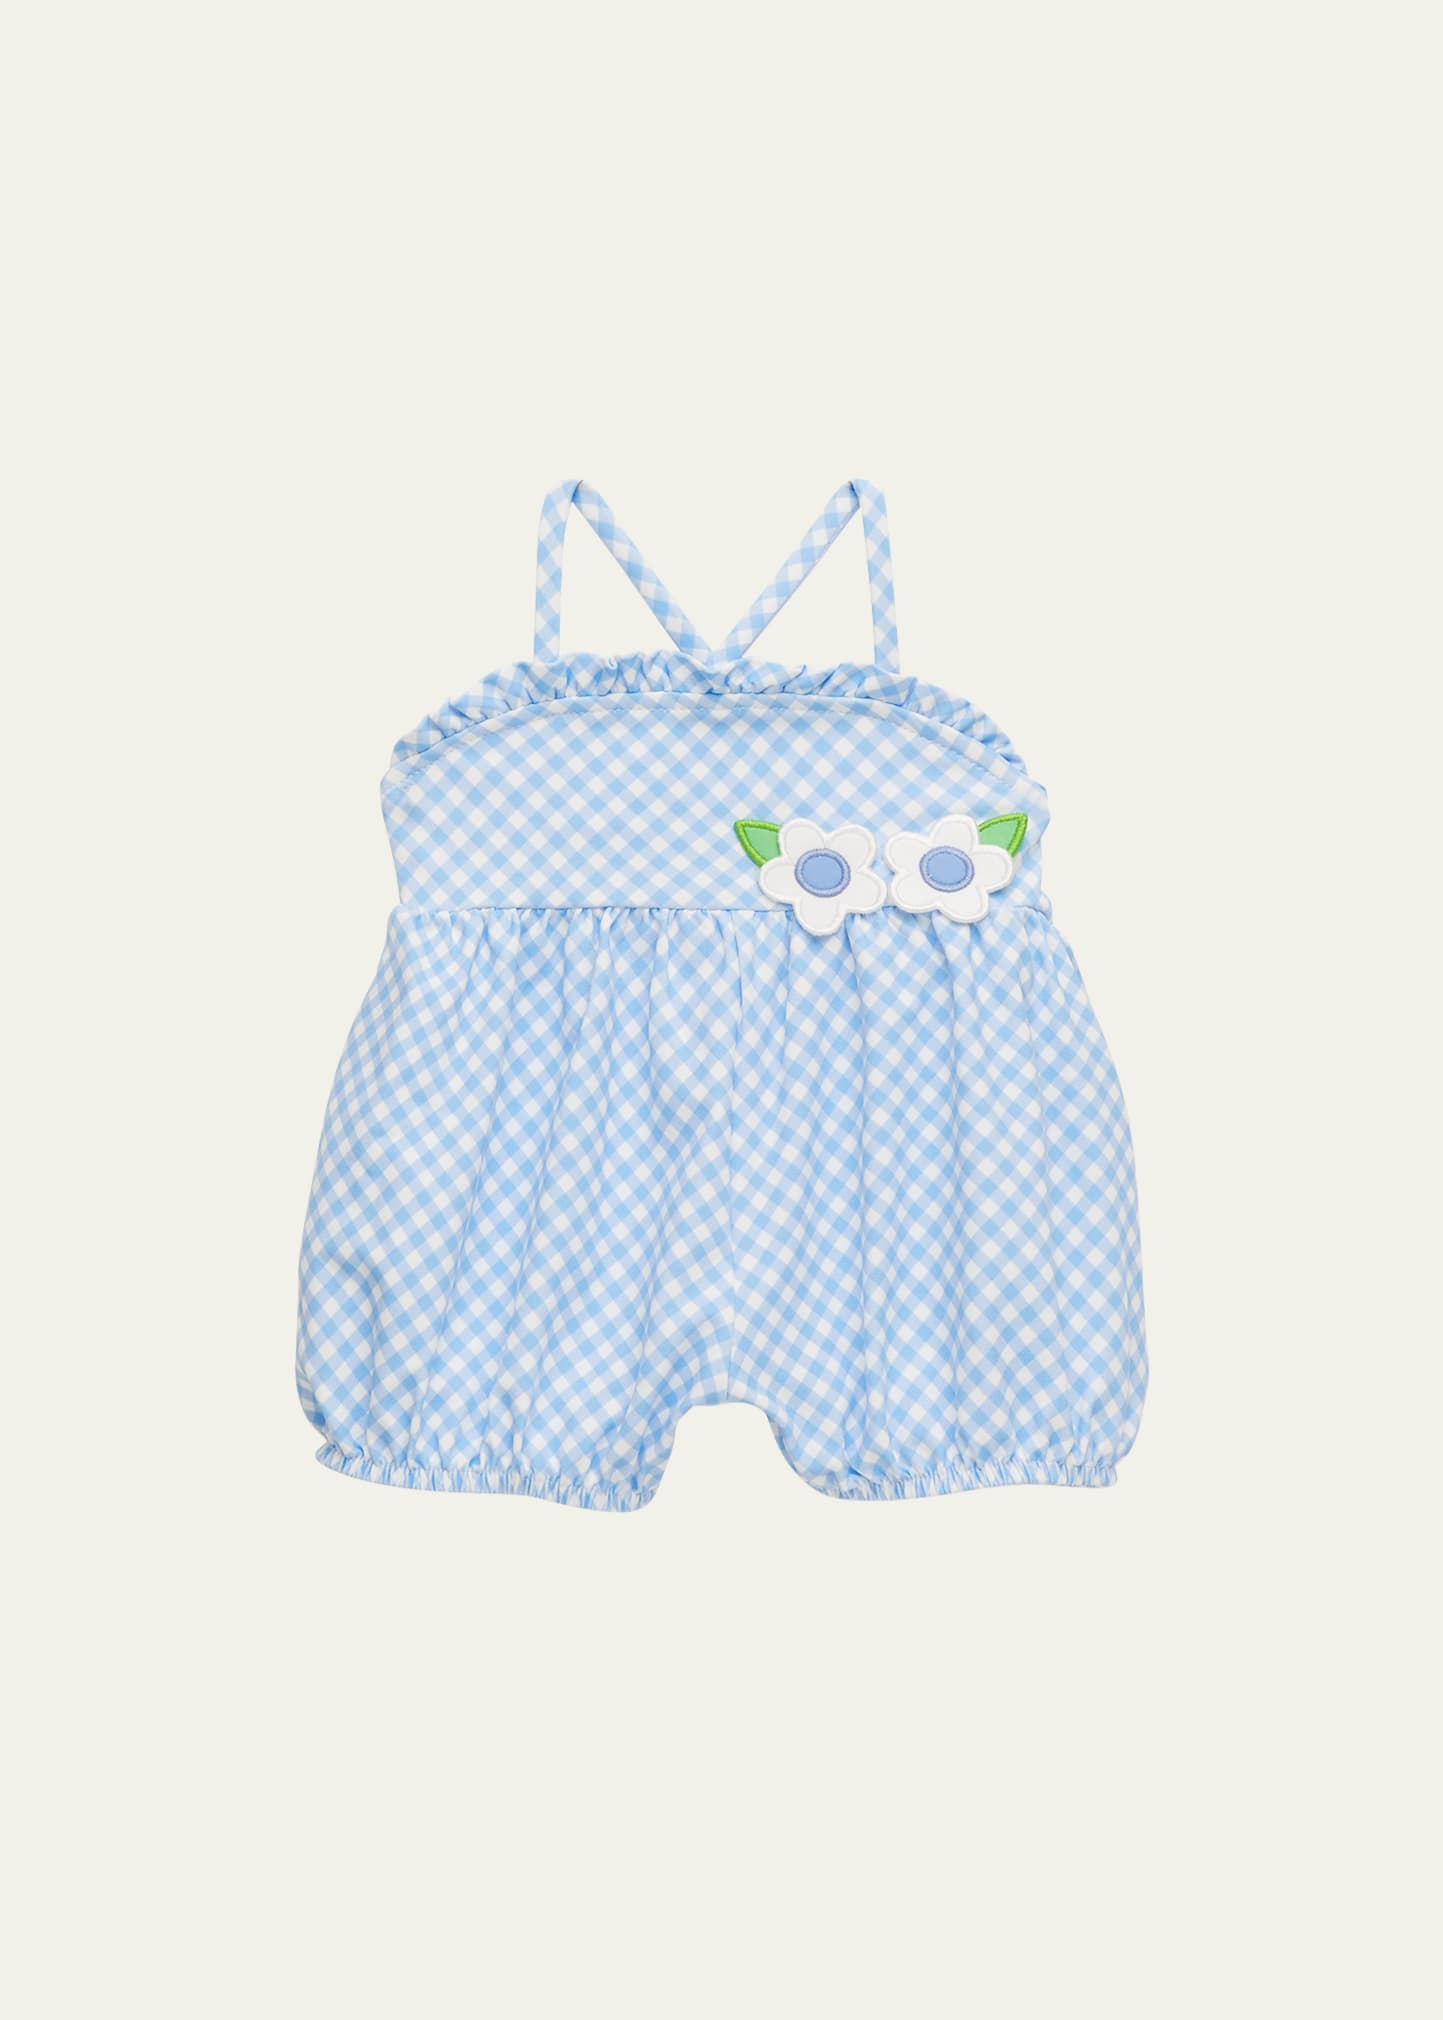 Florence Eiseman Girl's Gingham-Print Swimsuit W/ Flowers, Size 6M-24M